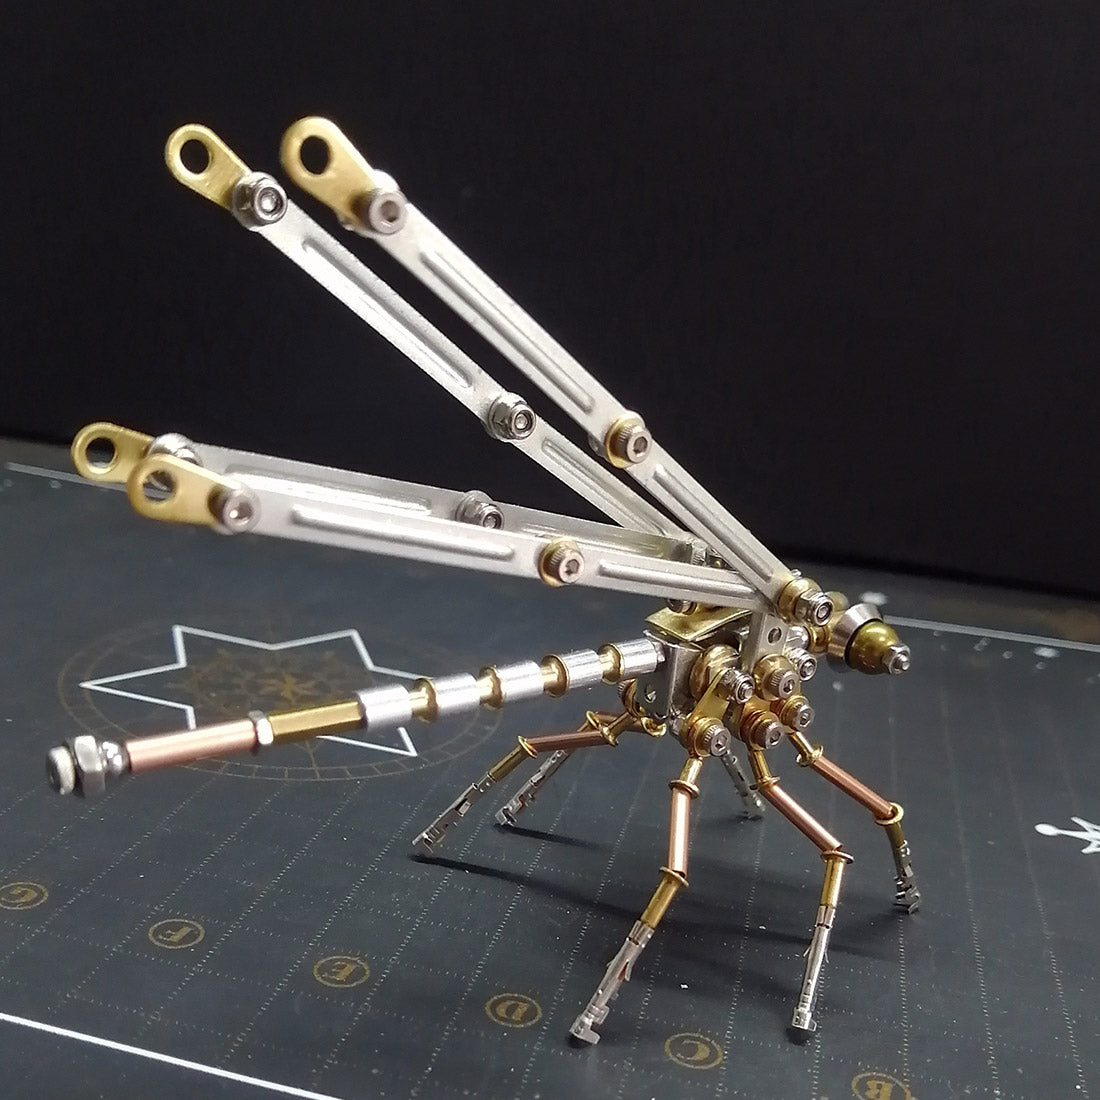 3D DIY Steampunk Insect Damselfly Metal Mode Building Kit Toy